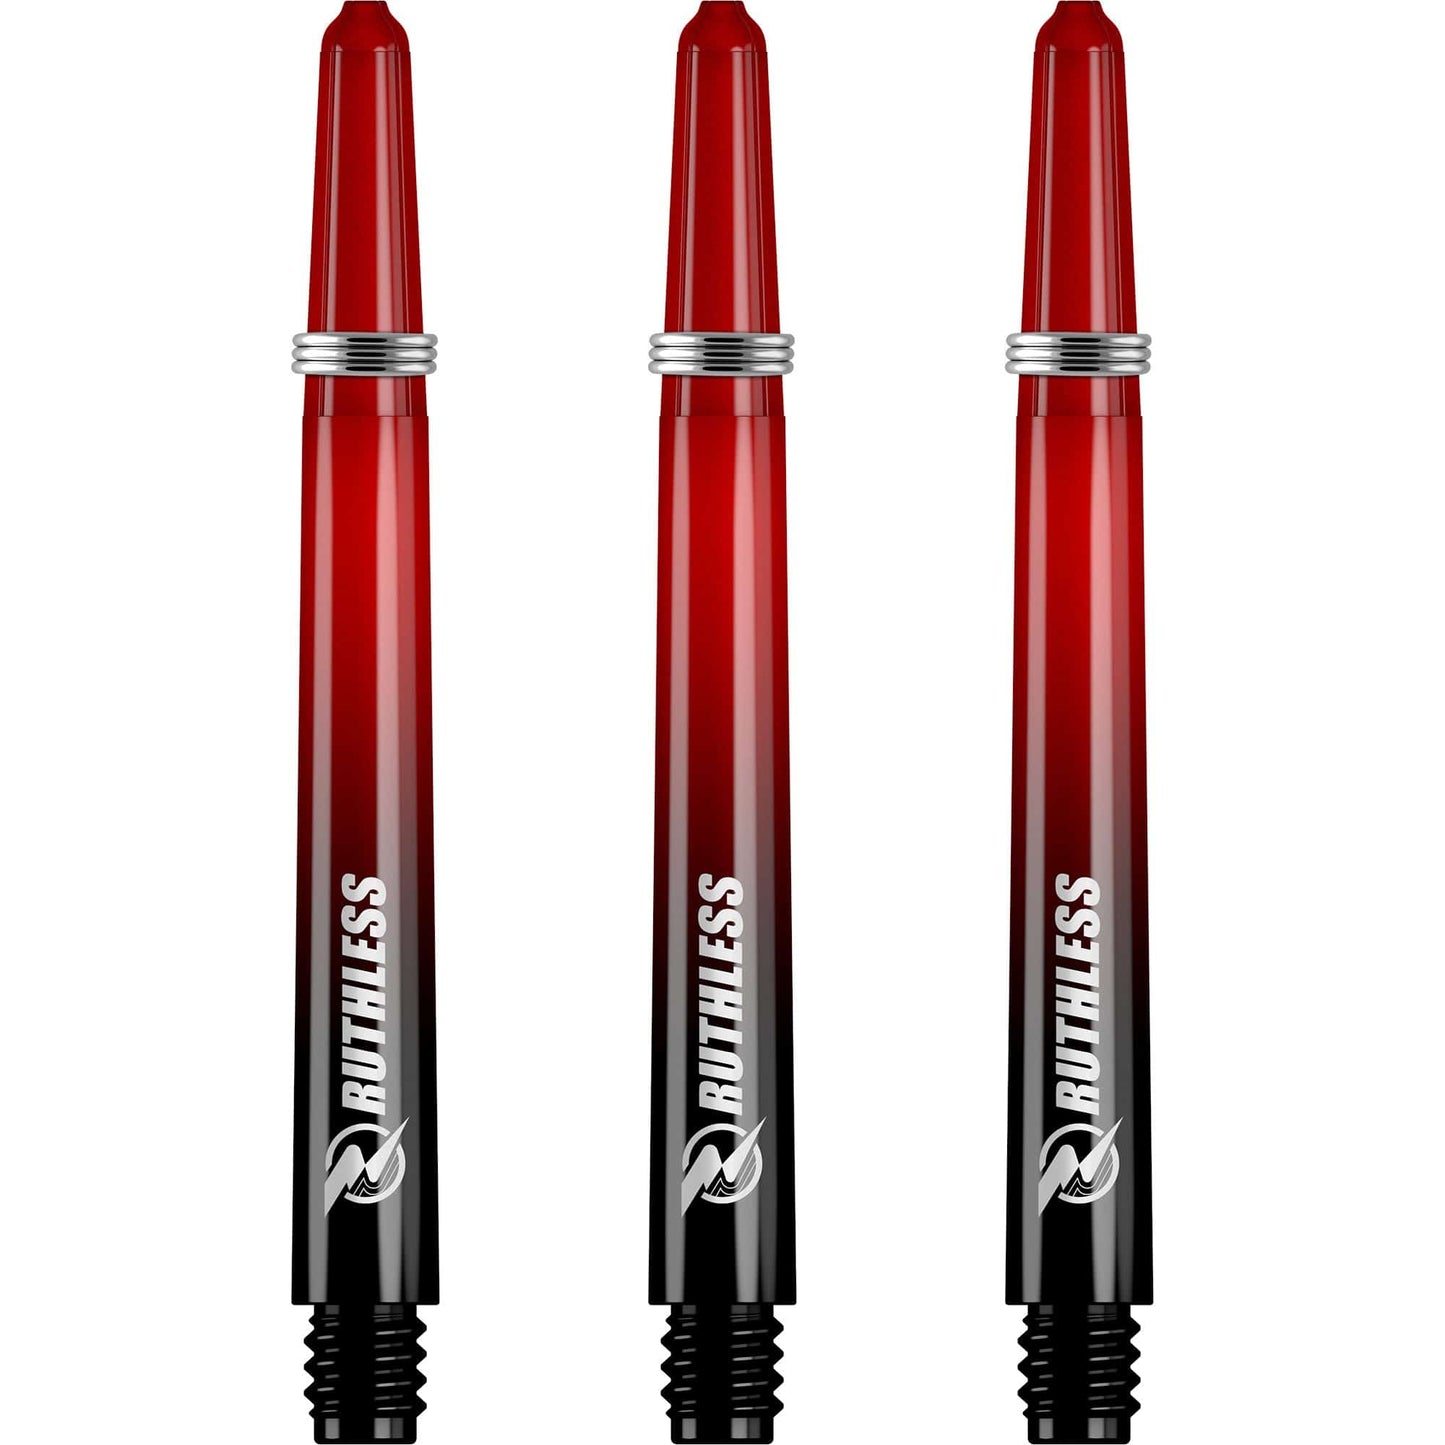 Ruthless Deflectagrip Plus Dart Shafts - Polycarbonate Stems with Springs - Red Medium